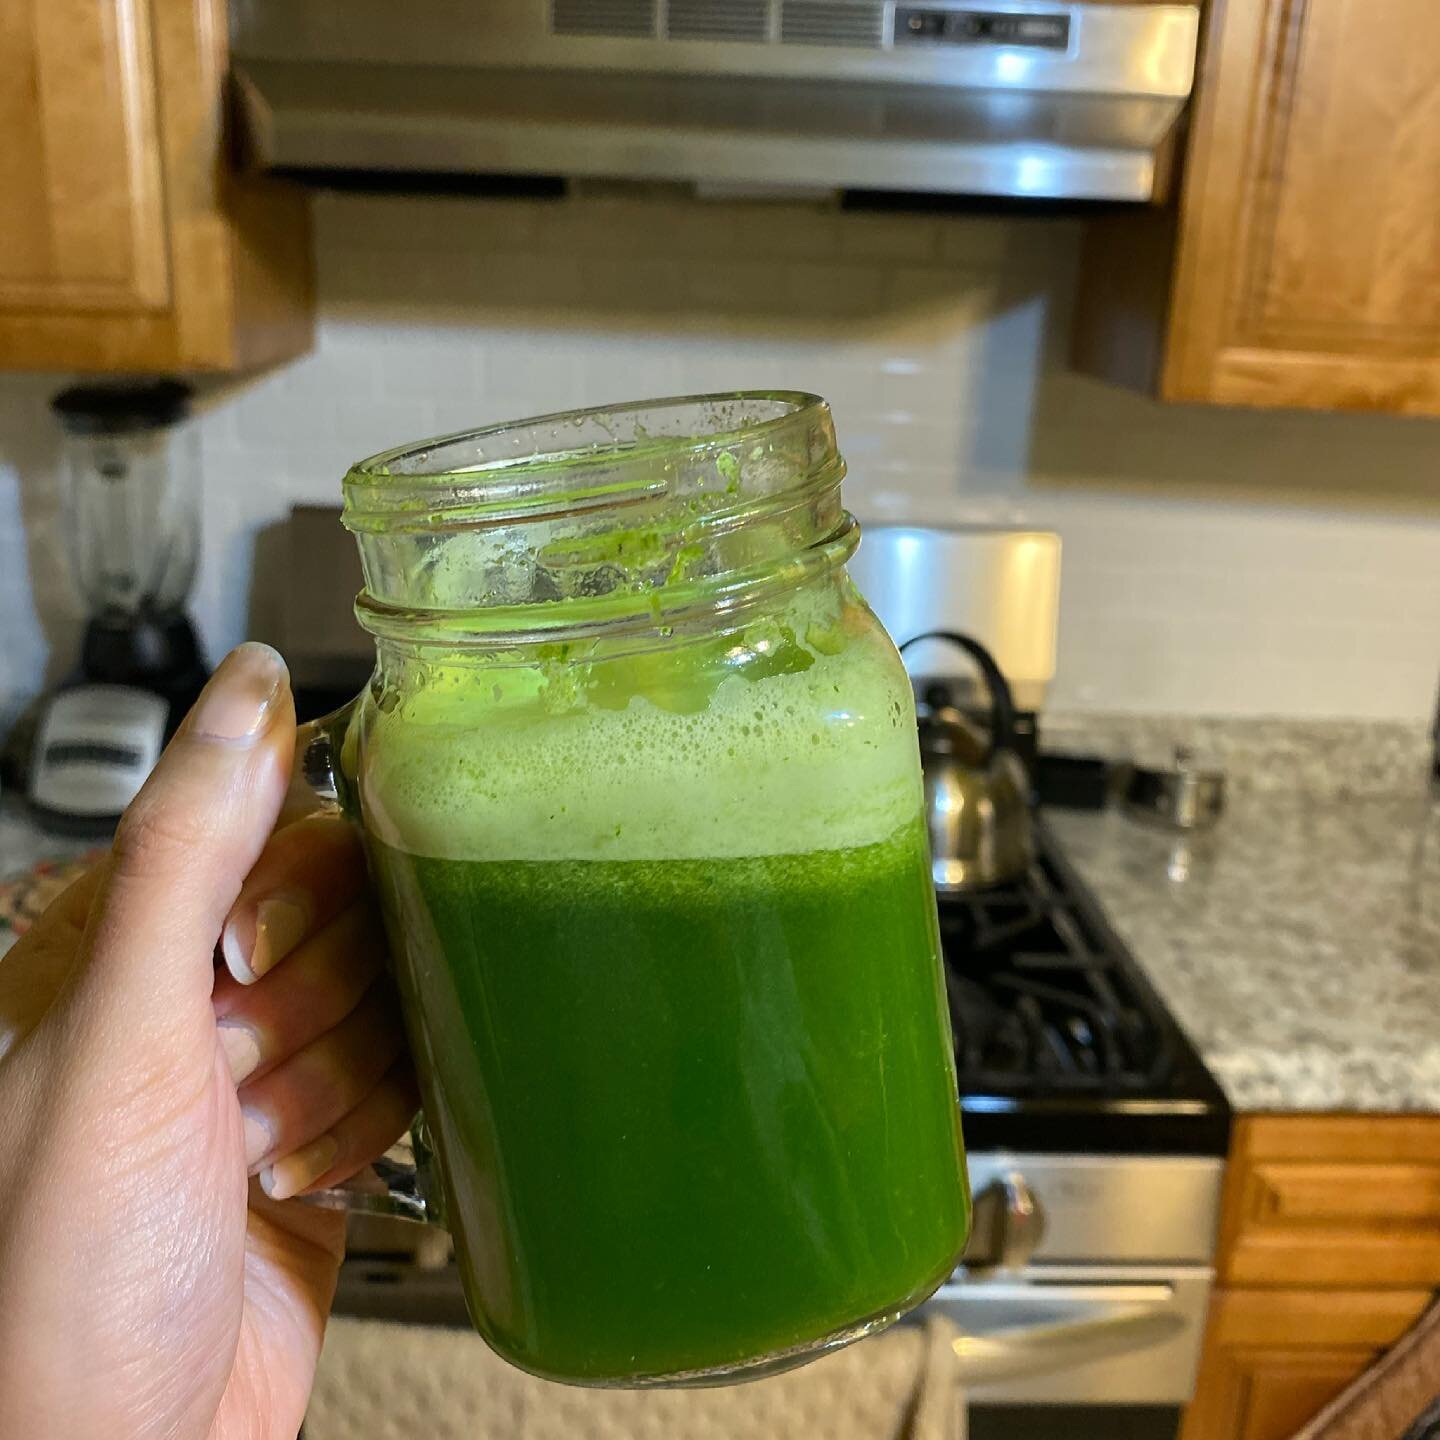 I love me a good and refreshing green juice! Made this one with spinach, celery, fresh lemon juice, black pepper and cayenne pepper. 💚😋